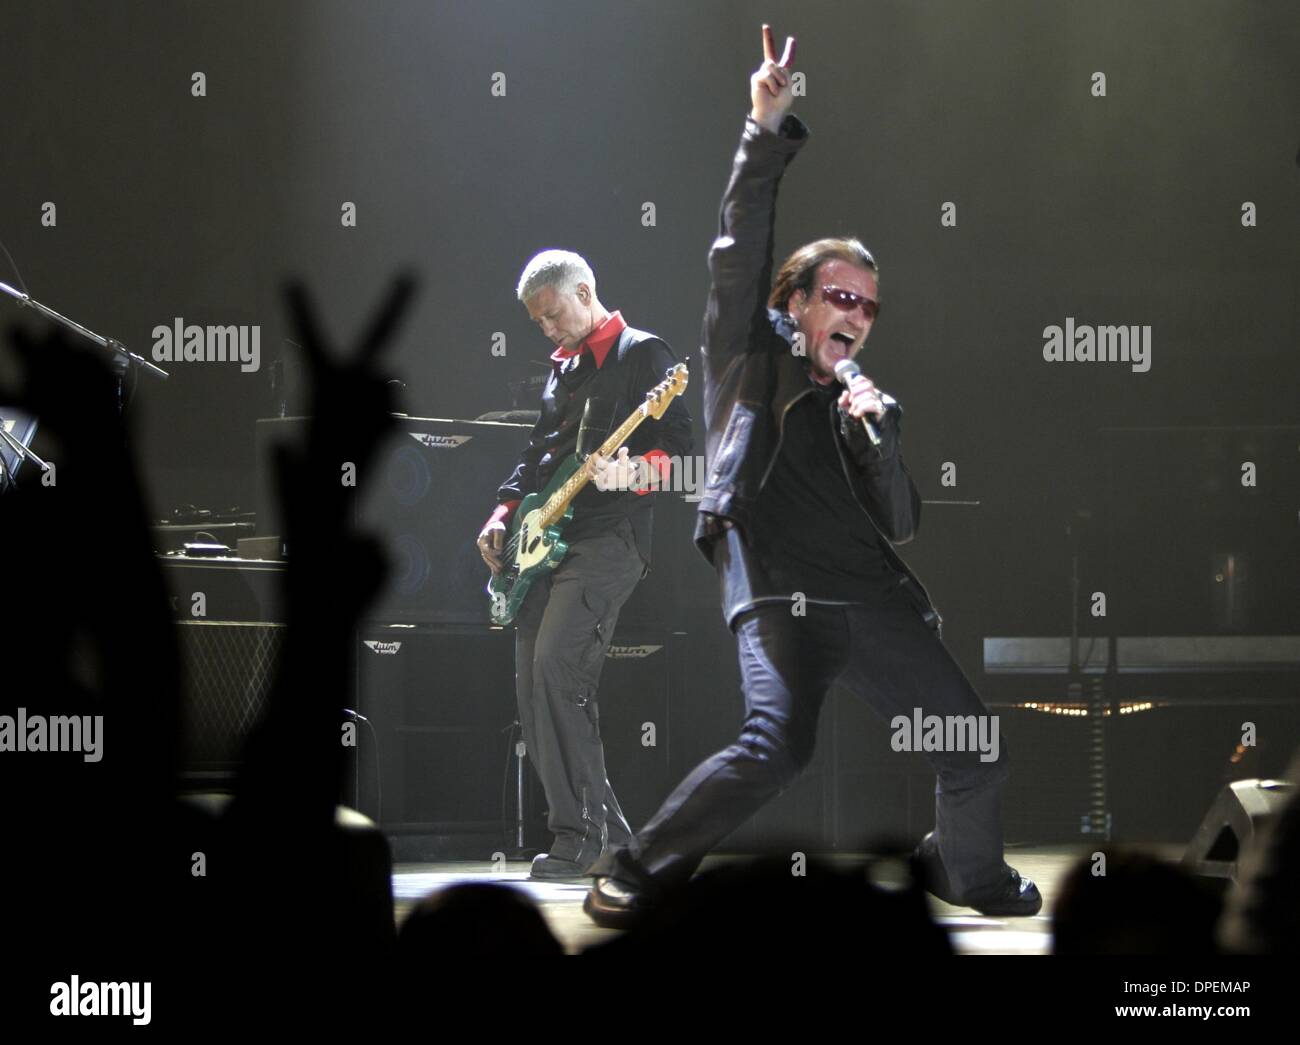 Published 3/29/2005, A-1) Bono and Adam Clayton at the opening of the U2 concert in San Diego Monday night to kick off their Vertigo tour in the